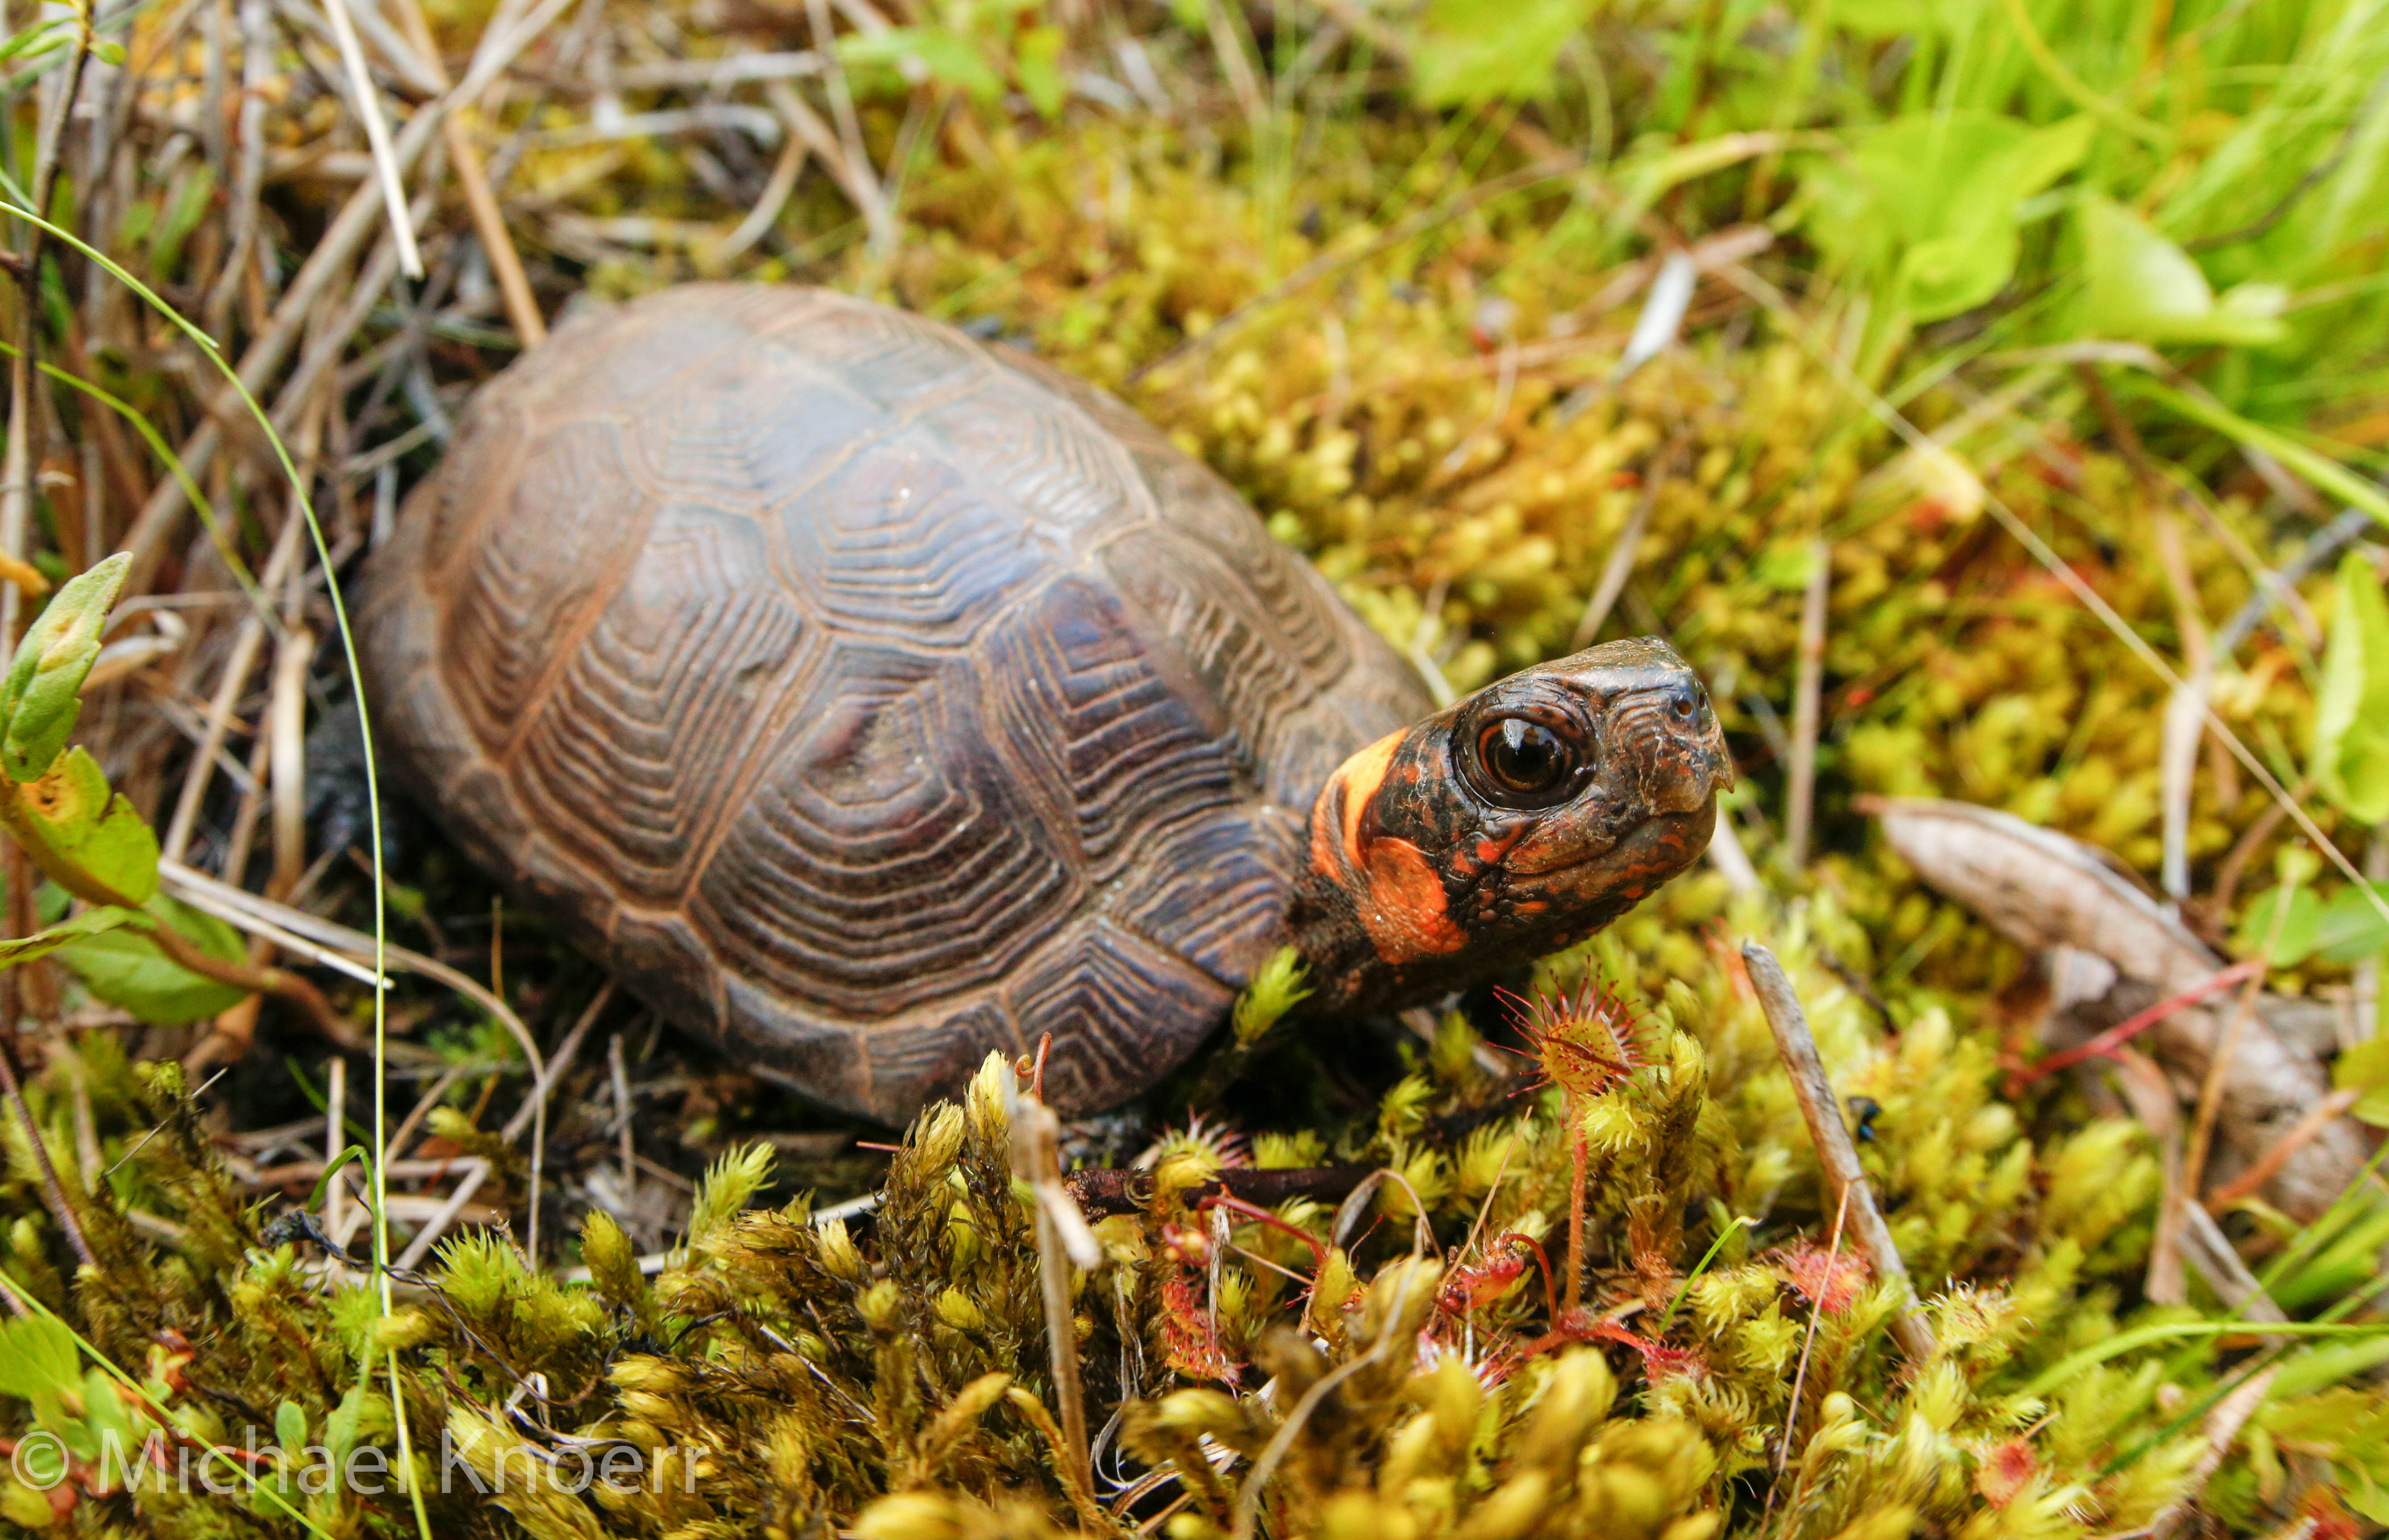 A small brown turtle with orange cheeks and a red speckled face sits in a patch of green moss.